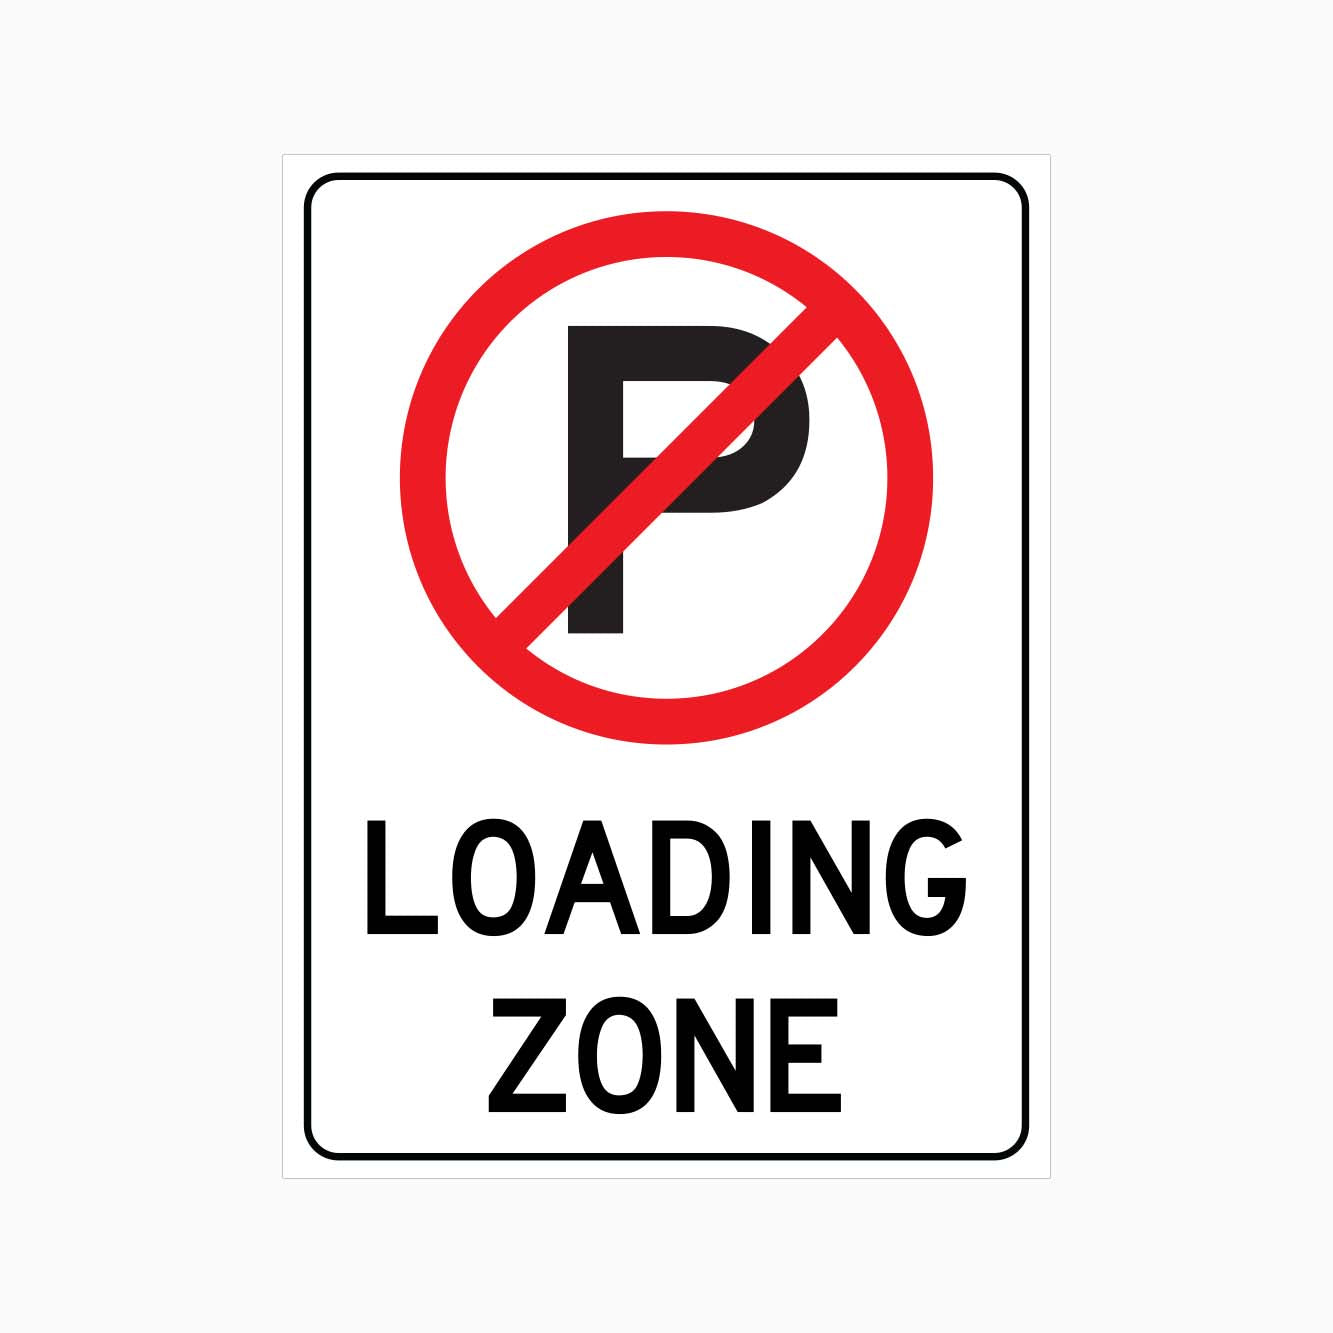 NO PARKING LOADING ZONE SIGN - GET SIGNS